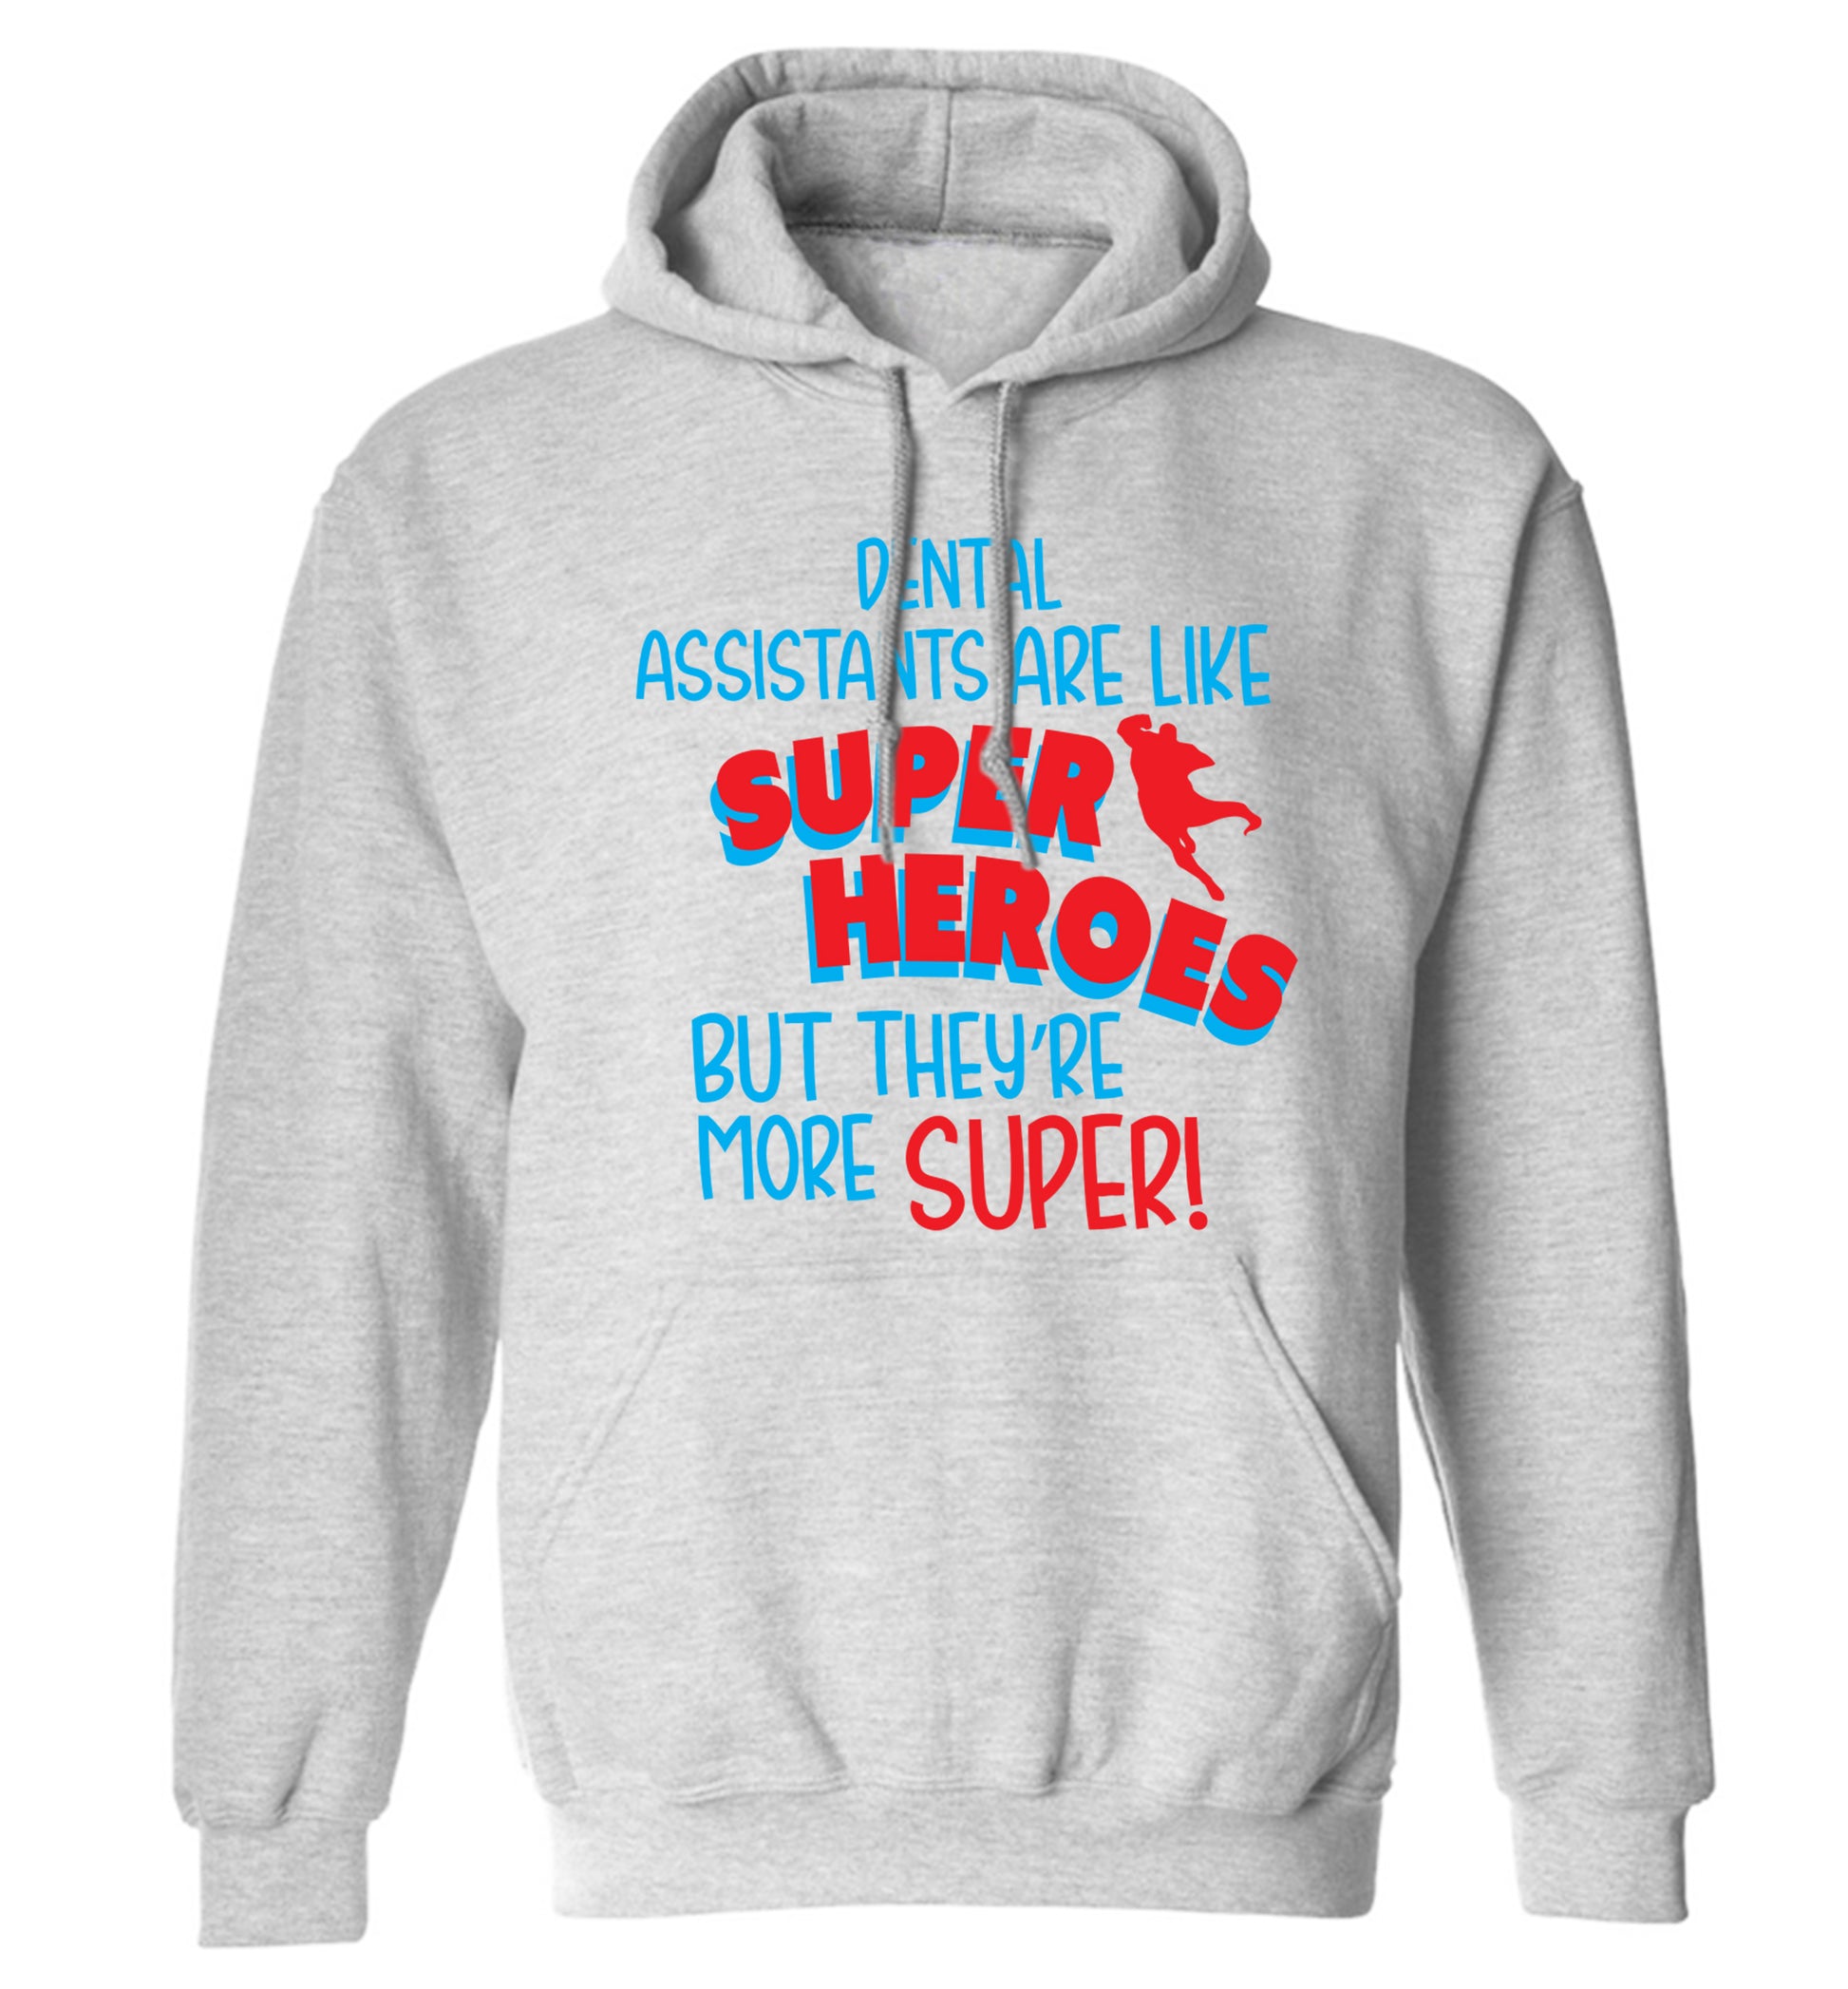 Dental Assistants are like superheros but they're more super adults unisex grey hoodie 2XL